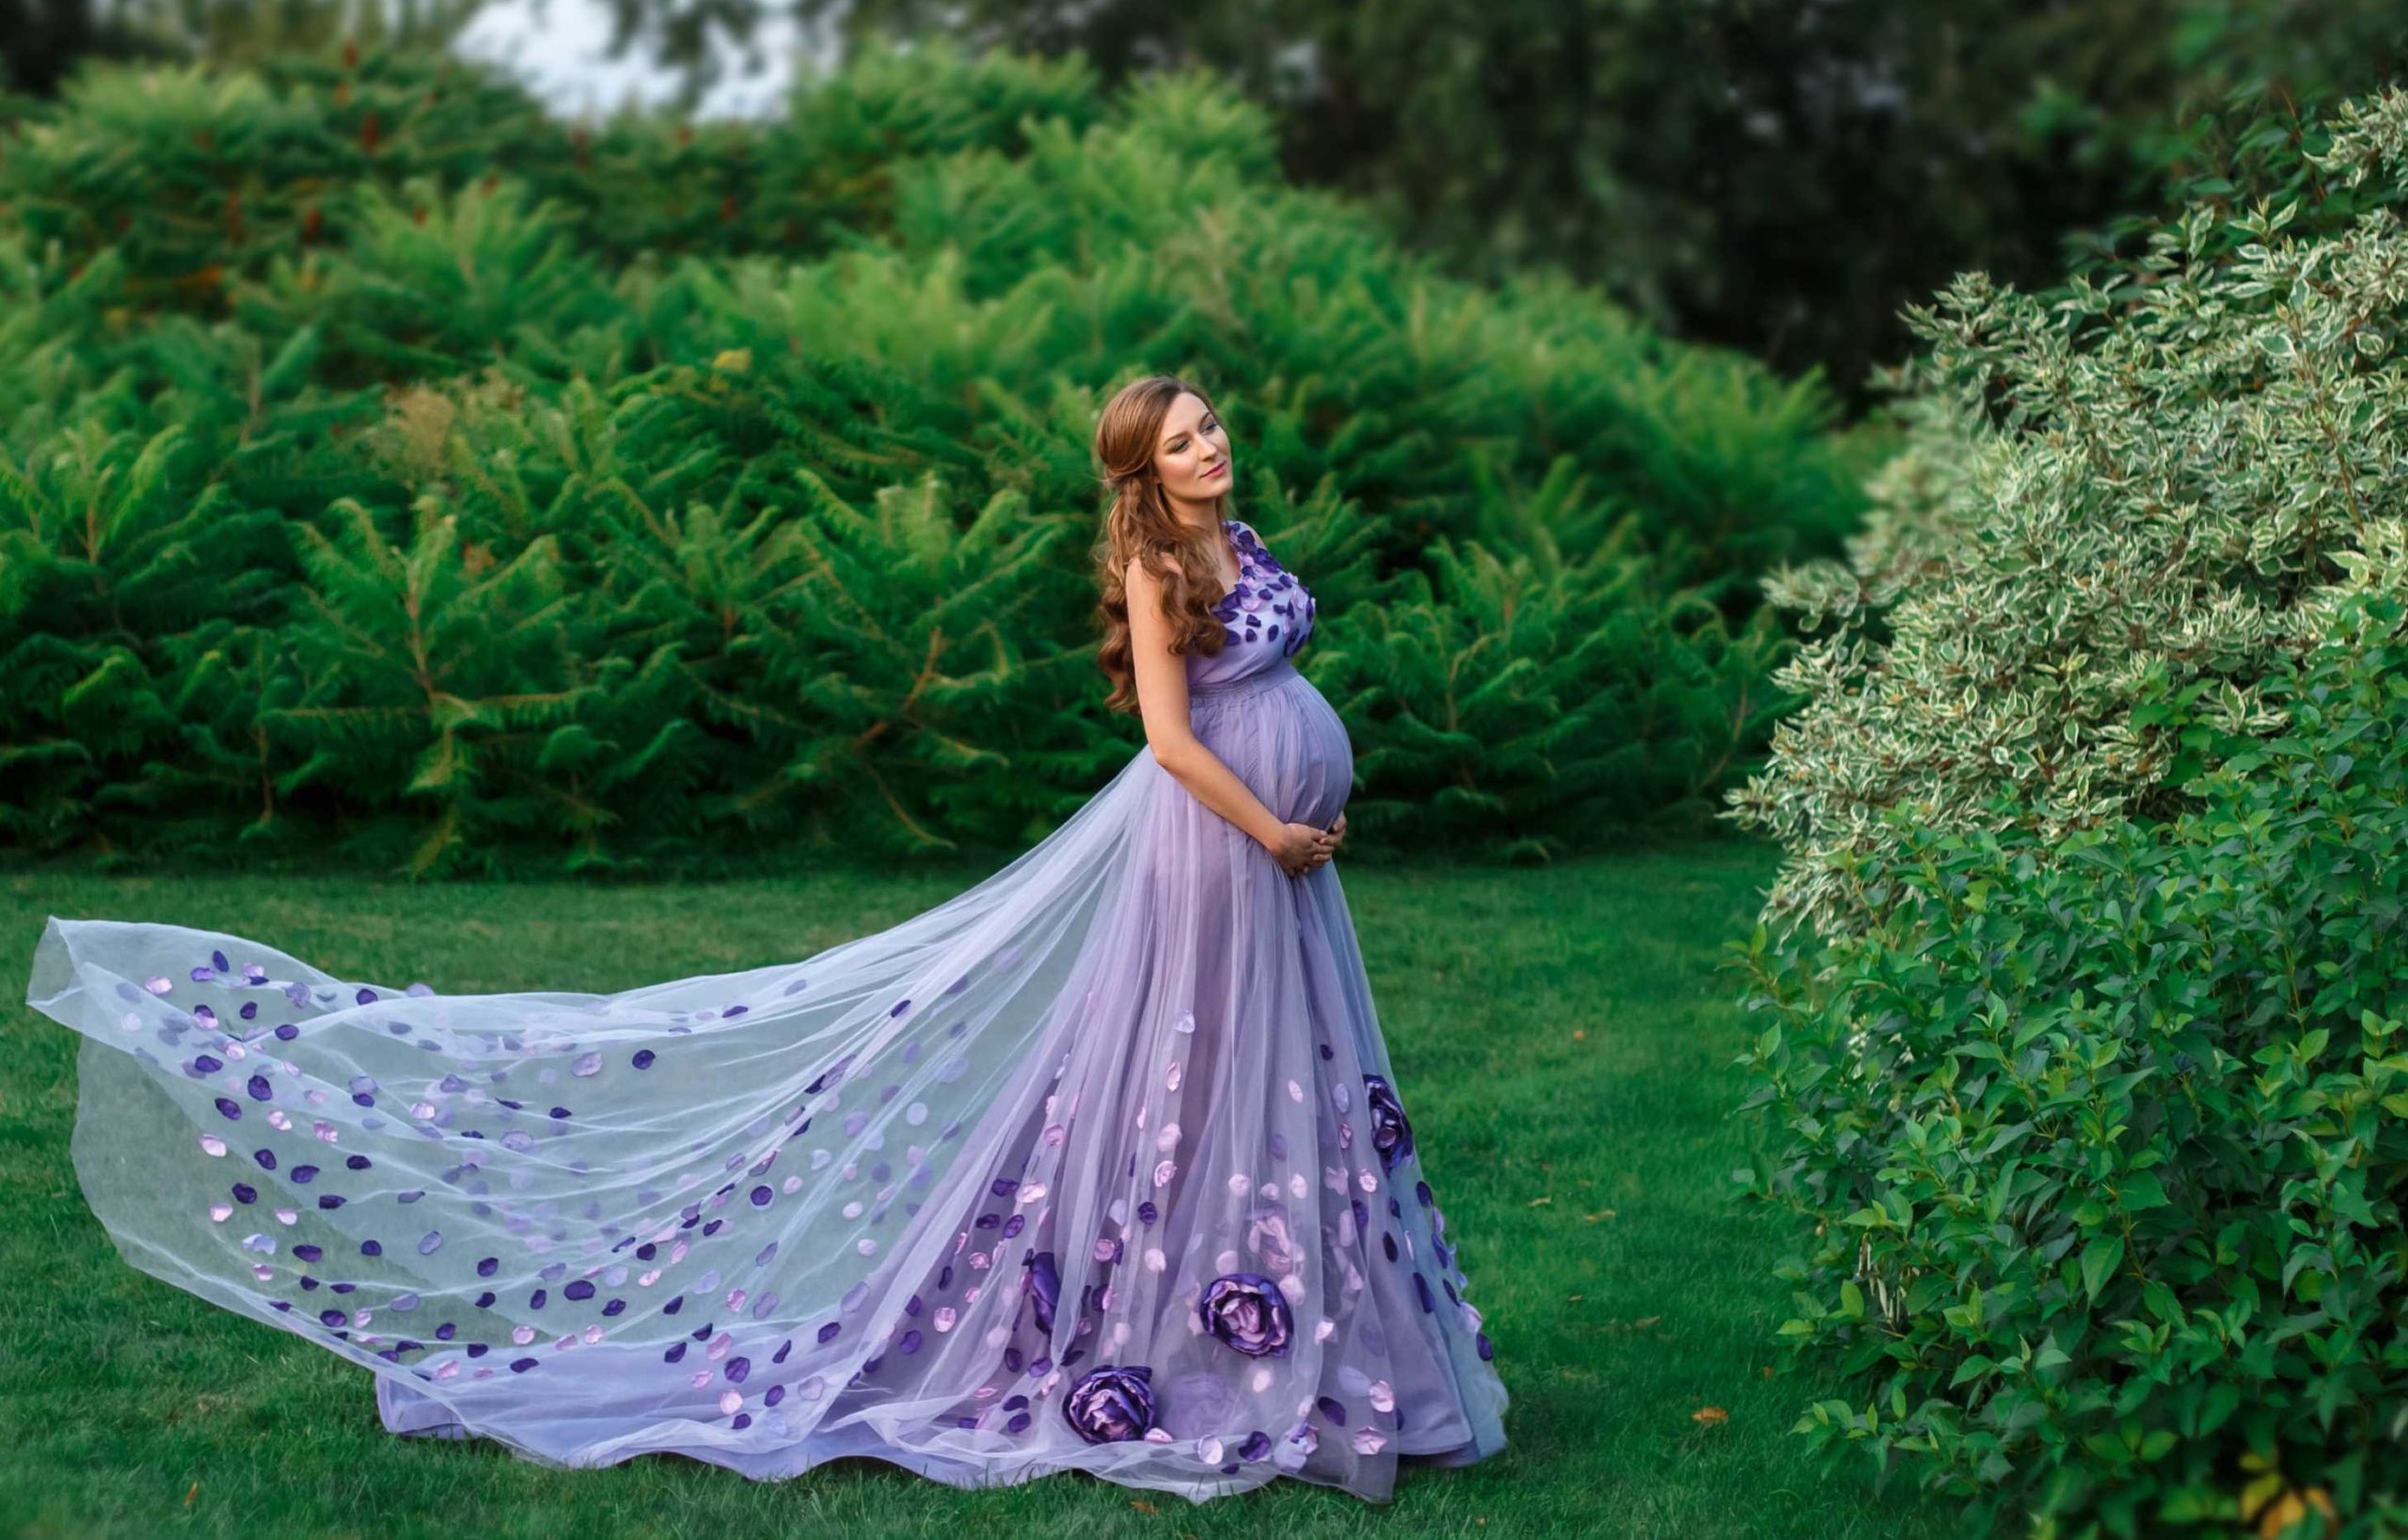 Fairy long dress scaled Hottest 25 Maternity Photoshoot Outfit Ideas - 17